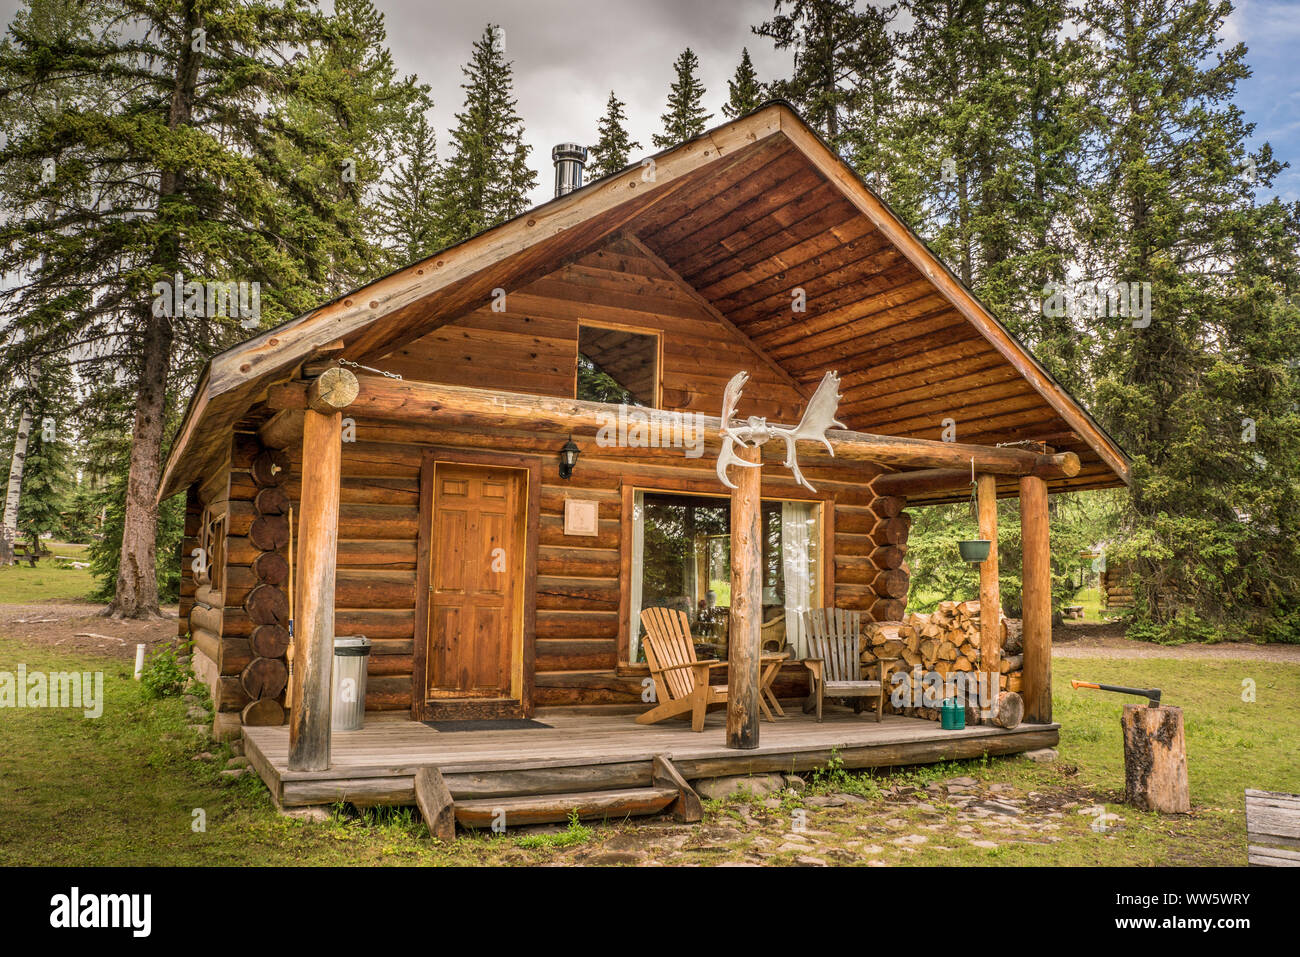 Log cabin from outside with antlers and firewood stack, British Columbia, Canada Stock Photo